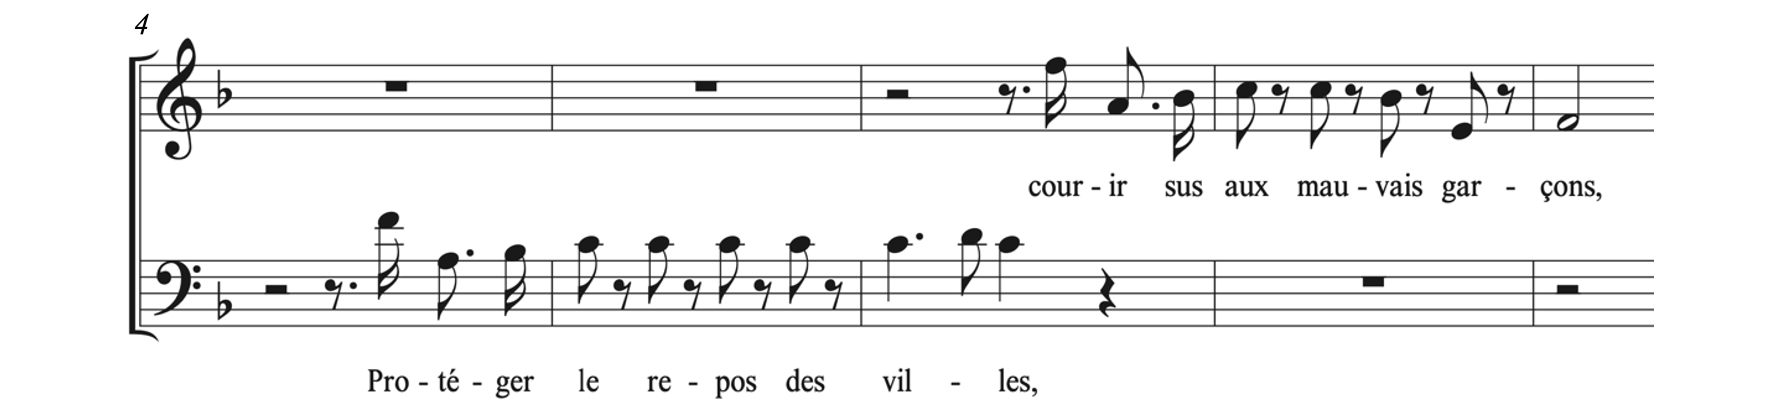 From Offenbach's Geneviève de Brabant, Act II, Couplets des hommes d’armes: The baritone part for 3 bars then the tenor part for 3 bars.